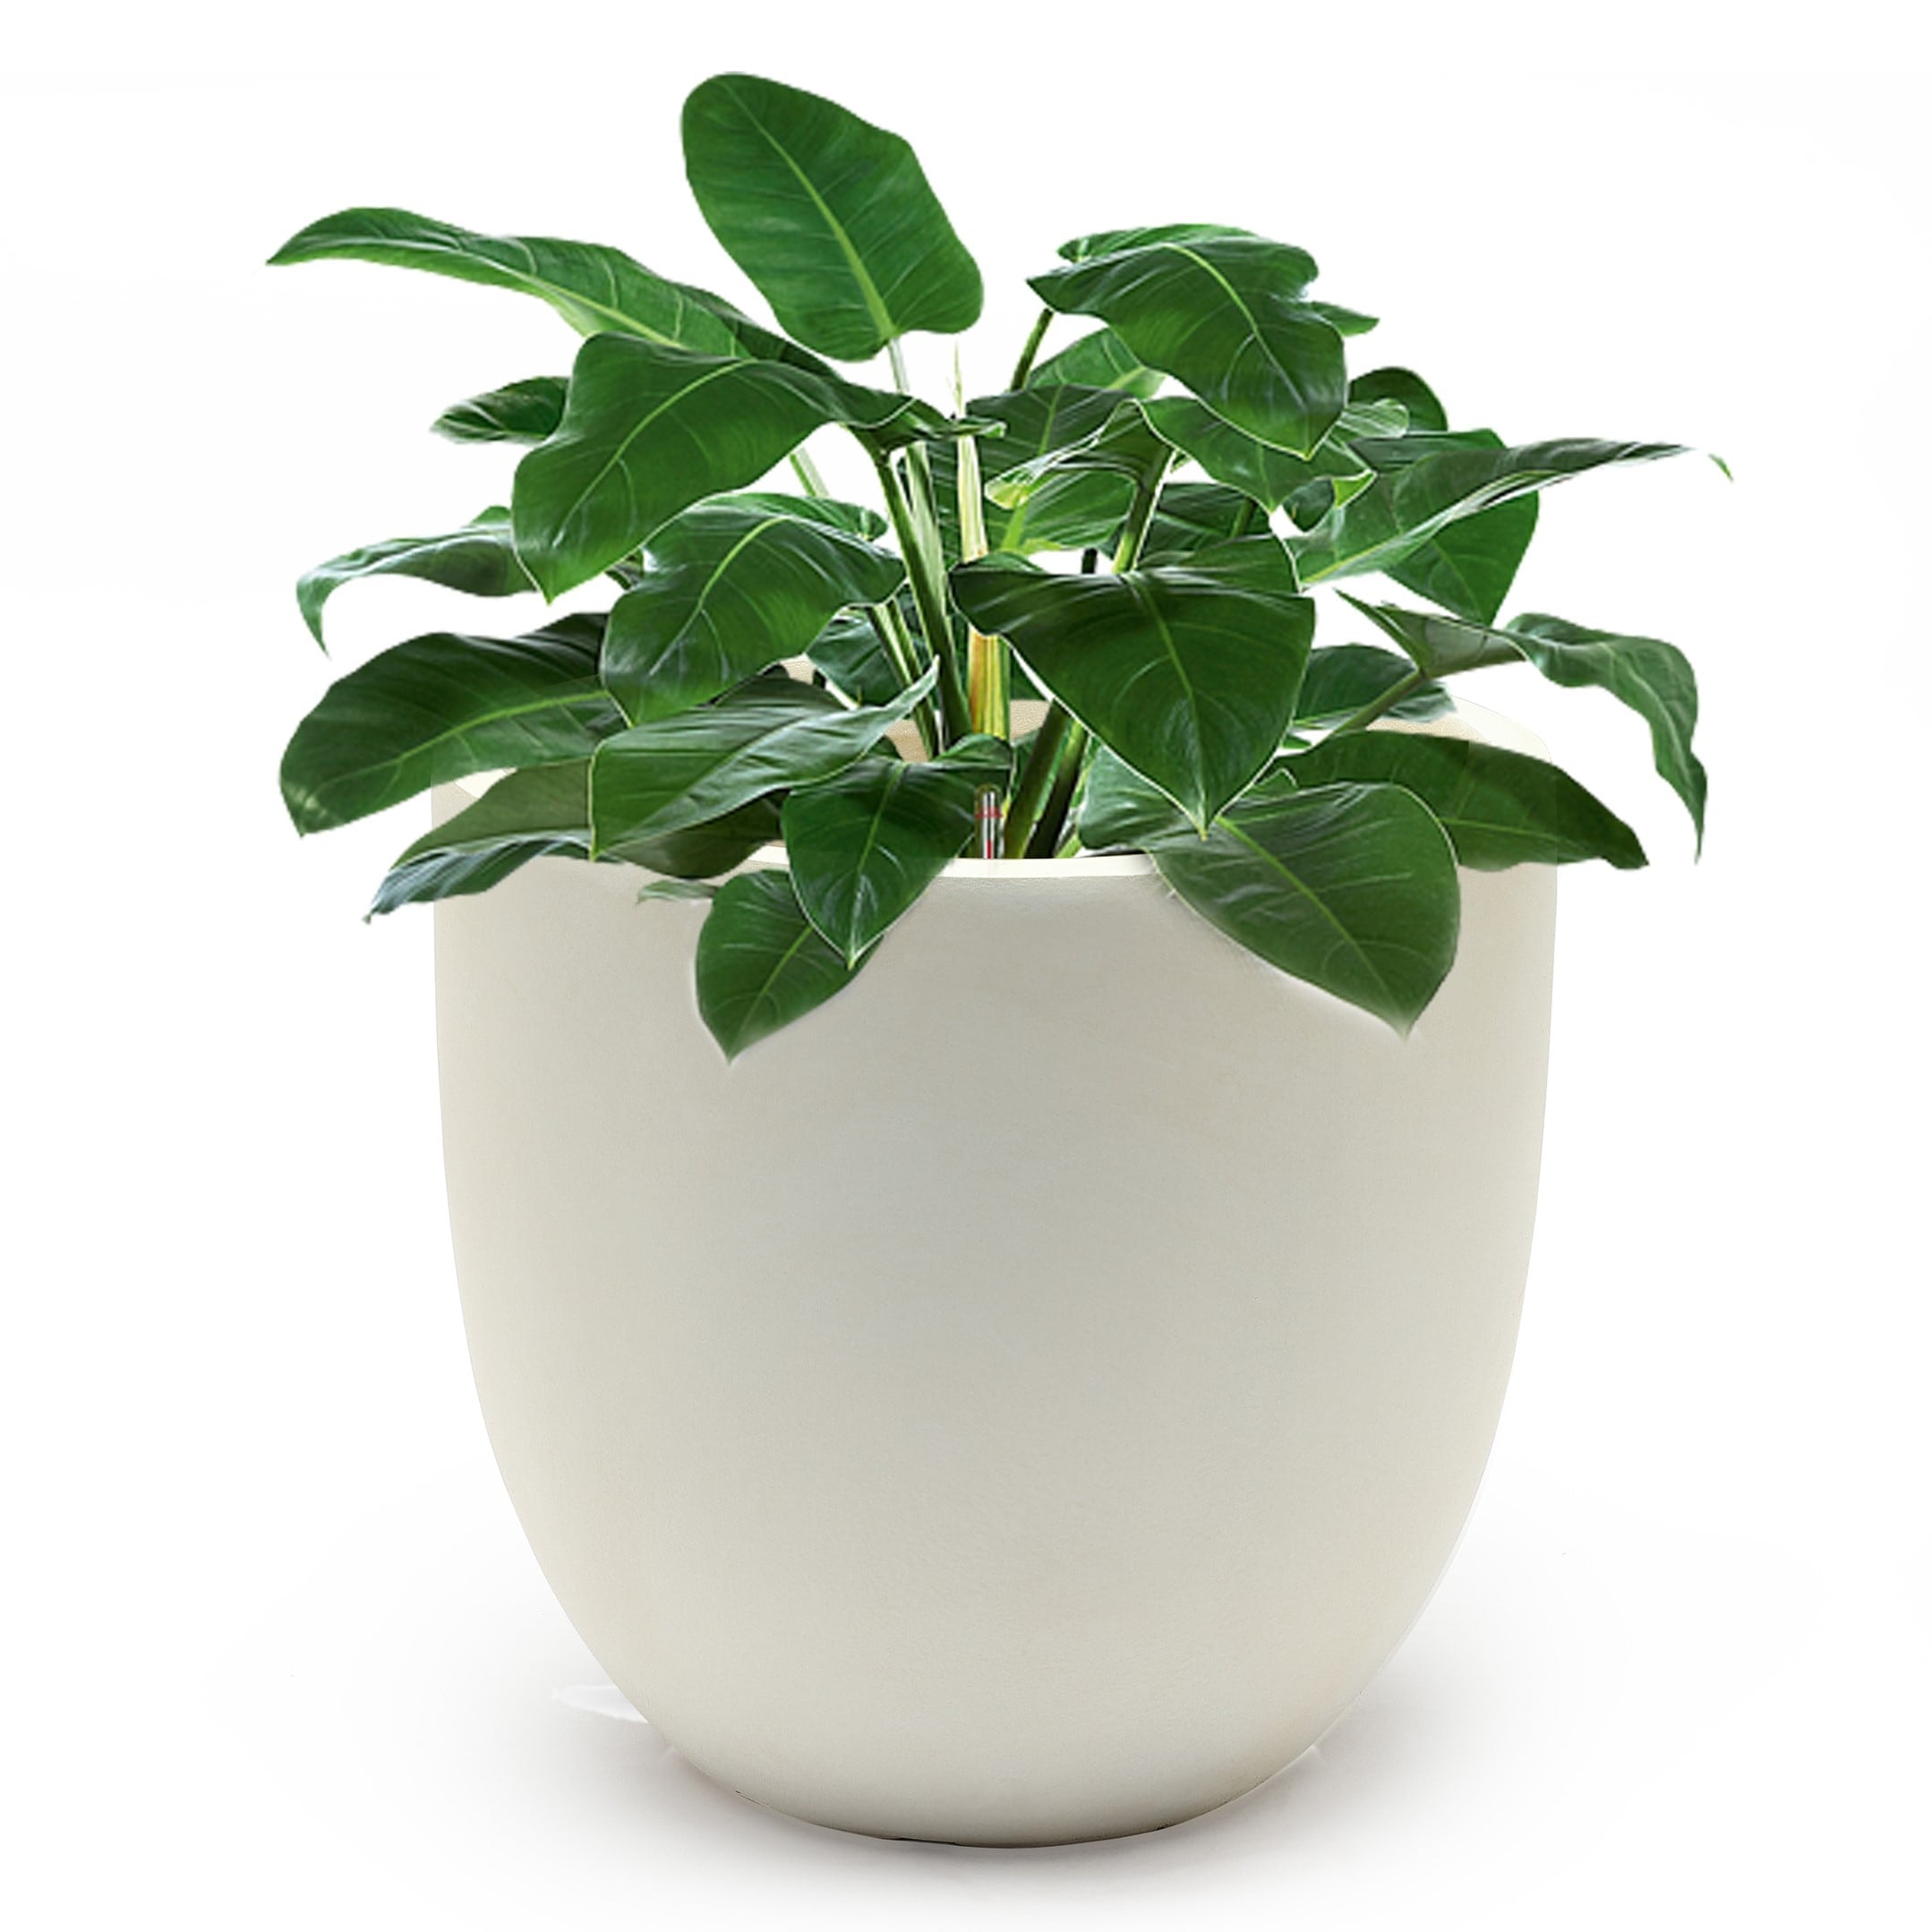 Tapered Round MgO Planter, Indoor and Outdoor - Bed Bath & Beyond - 15004738